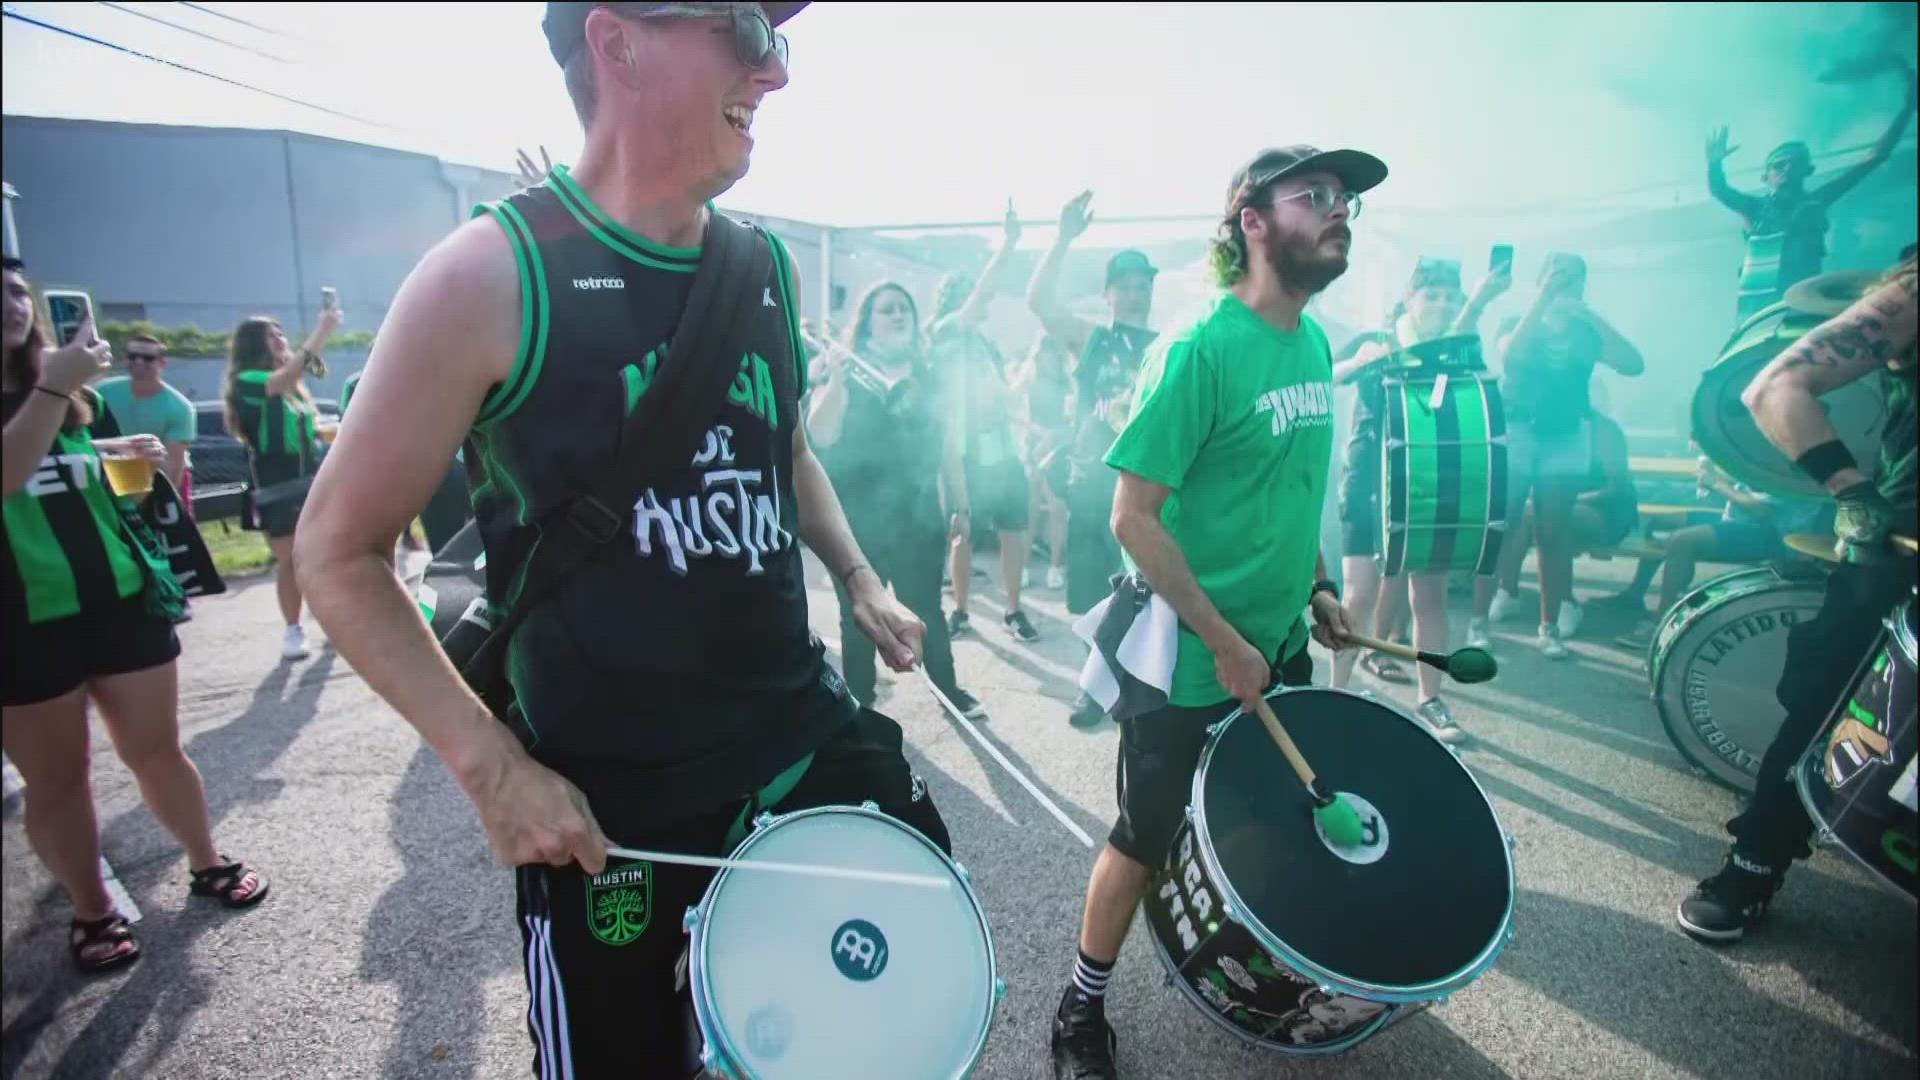 A member of the Austin FC support band was assaulted after a game in Houston.